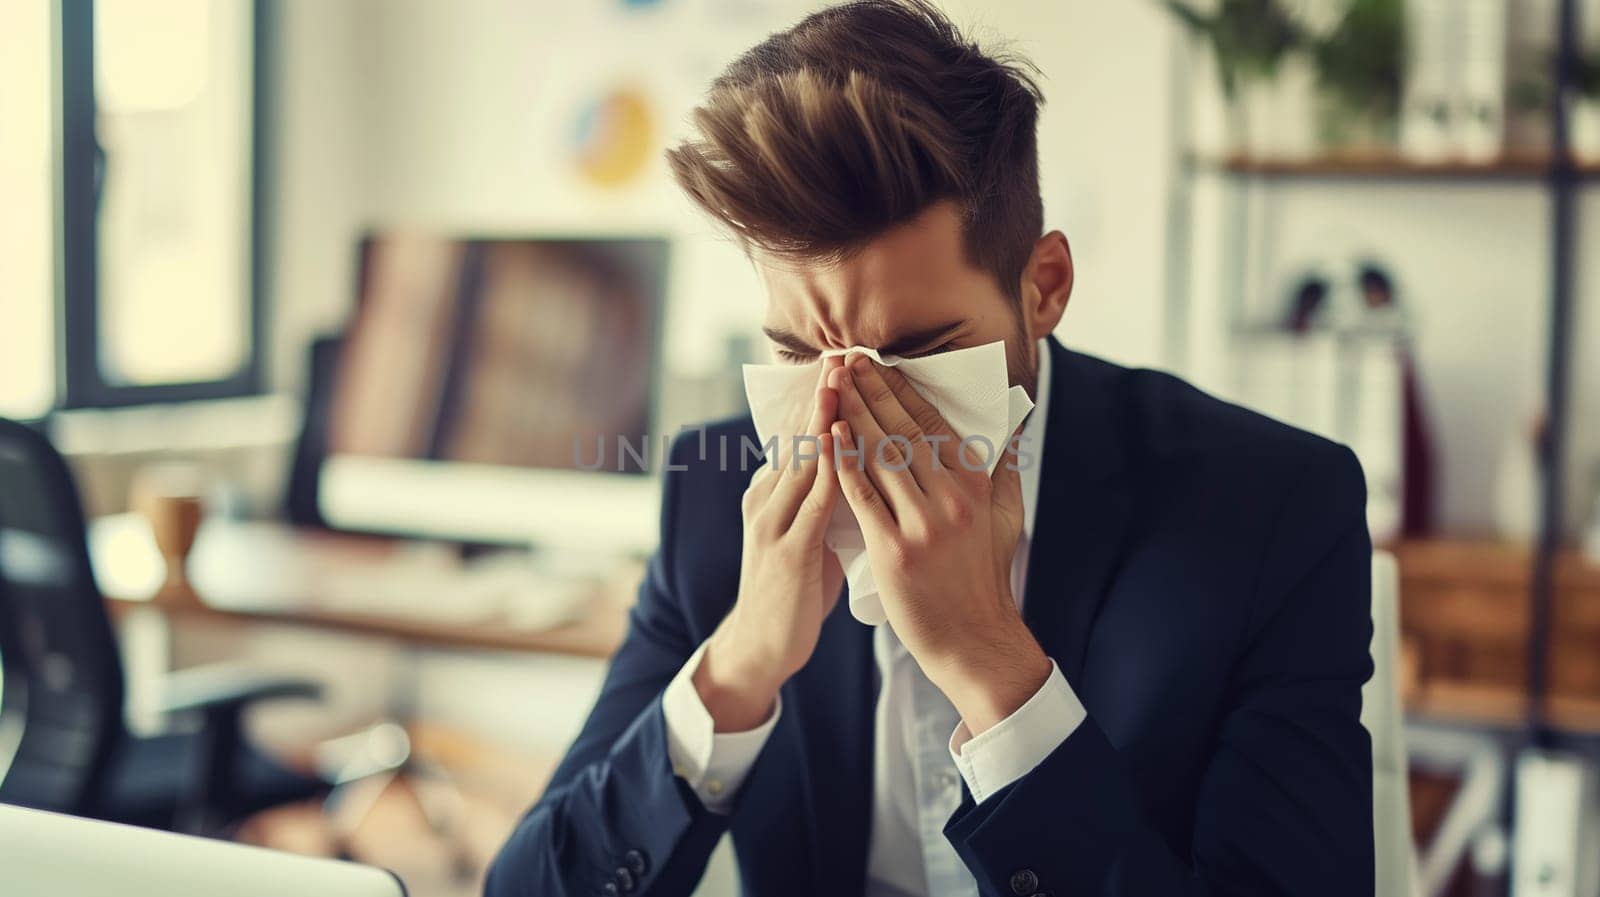 Sick exhausted caucasian man employee sneezing blow nose with tissue, suffers from influenza virus in workplace in the office